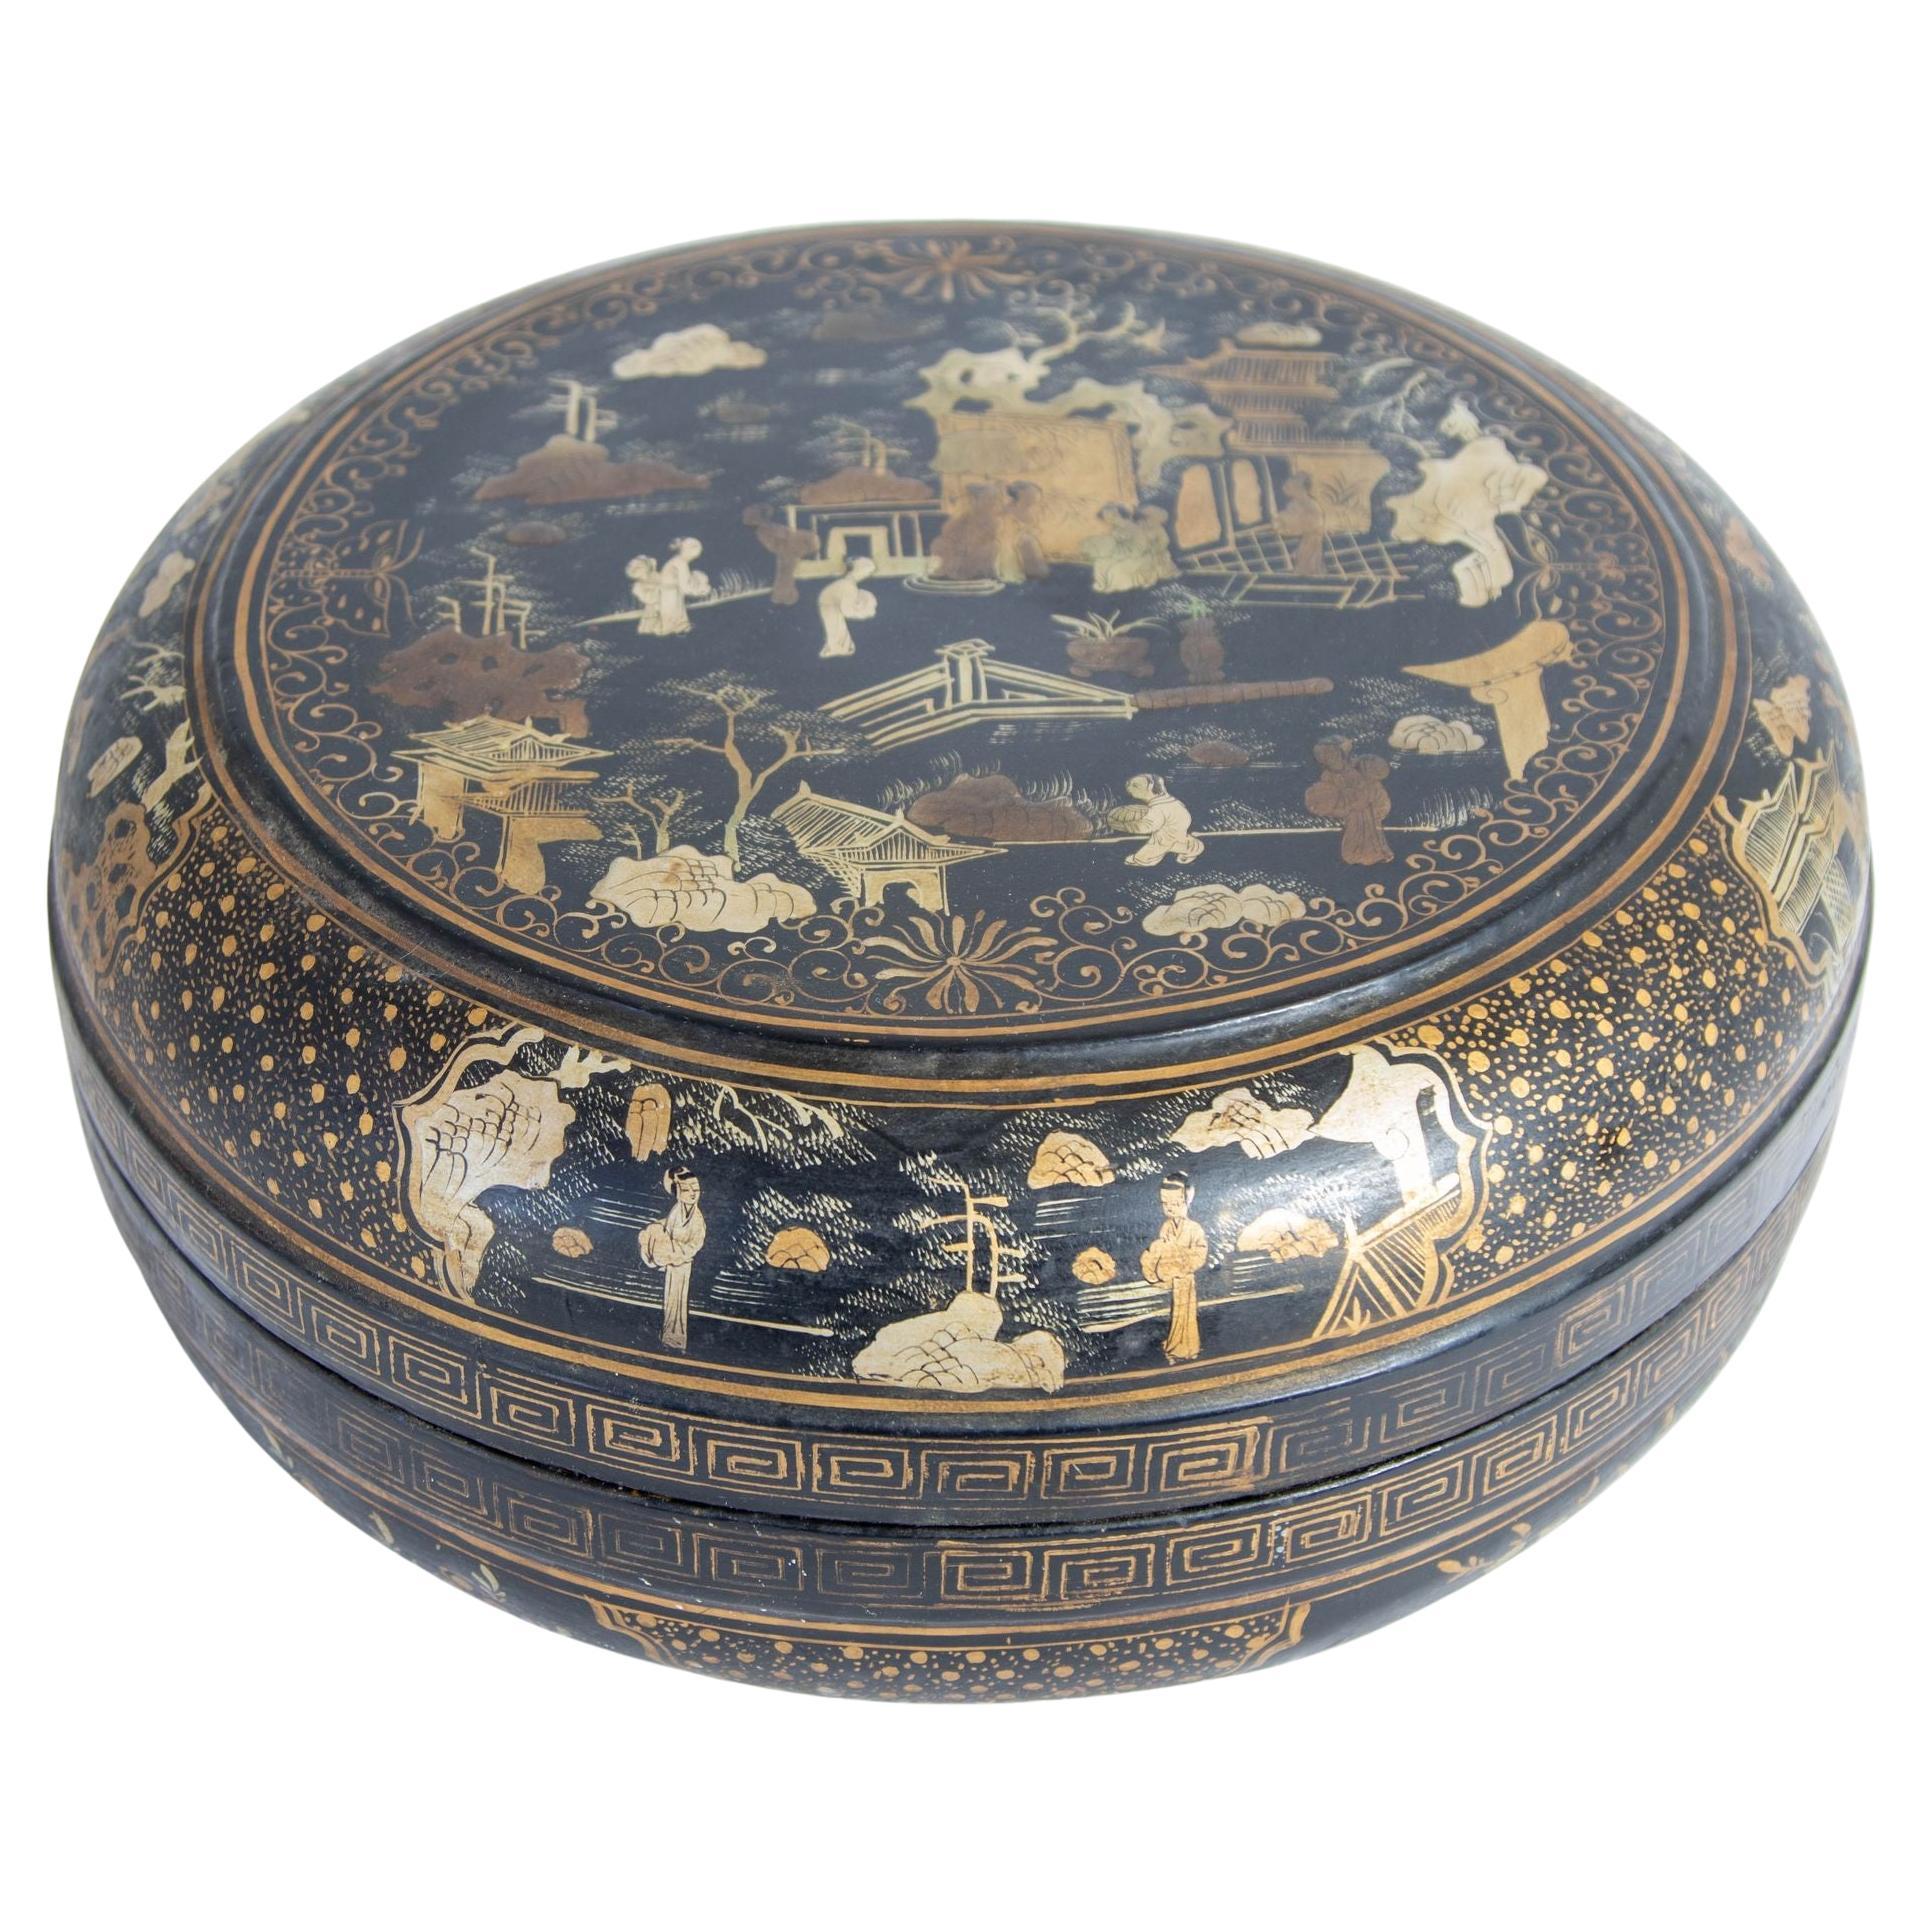 Large Chinese Export Round Black Lacquered Gilt Painted Covered Box 1950s